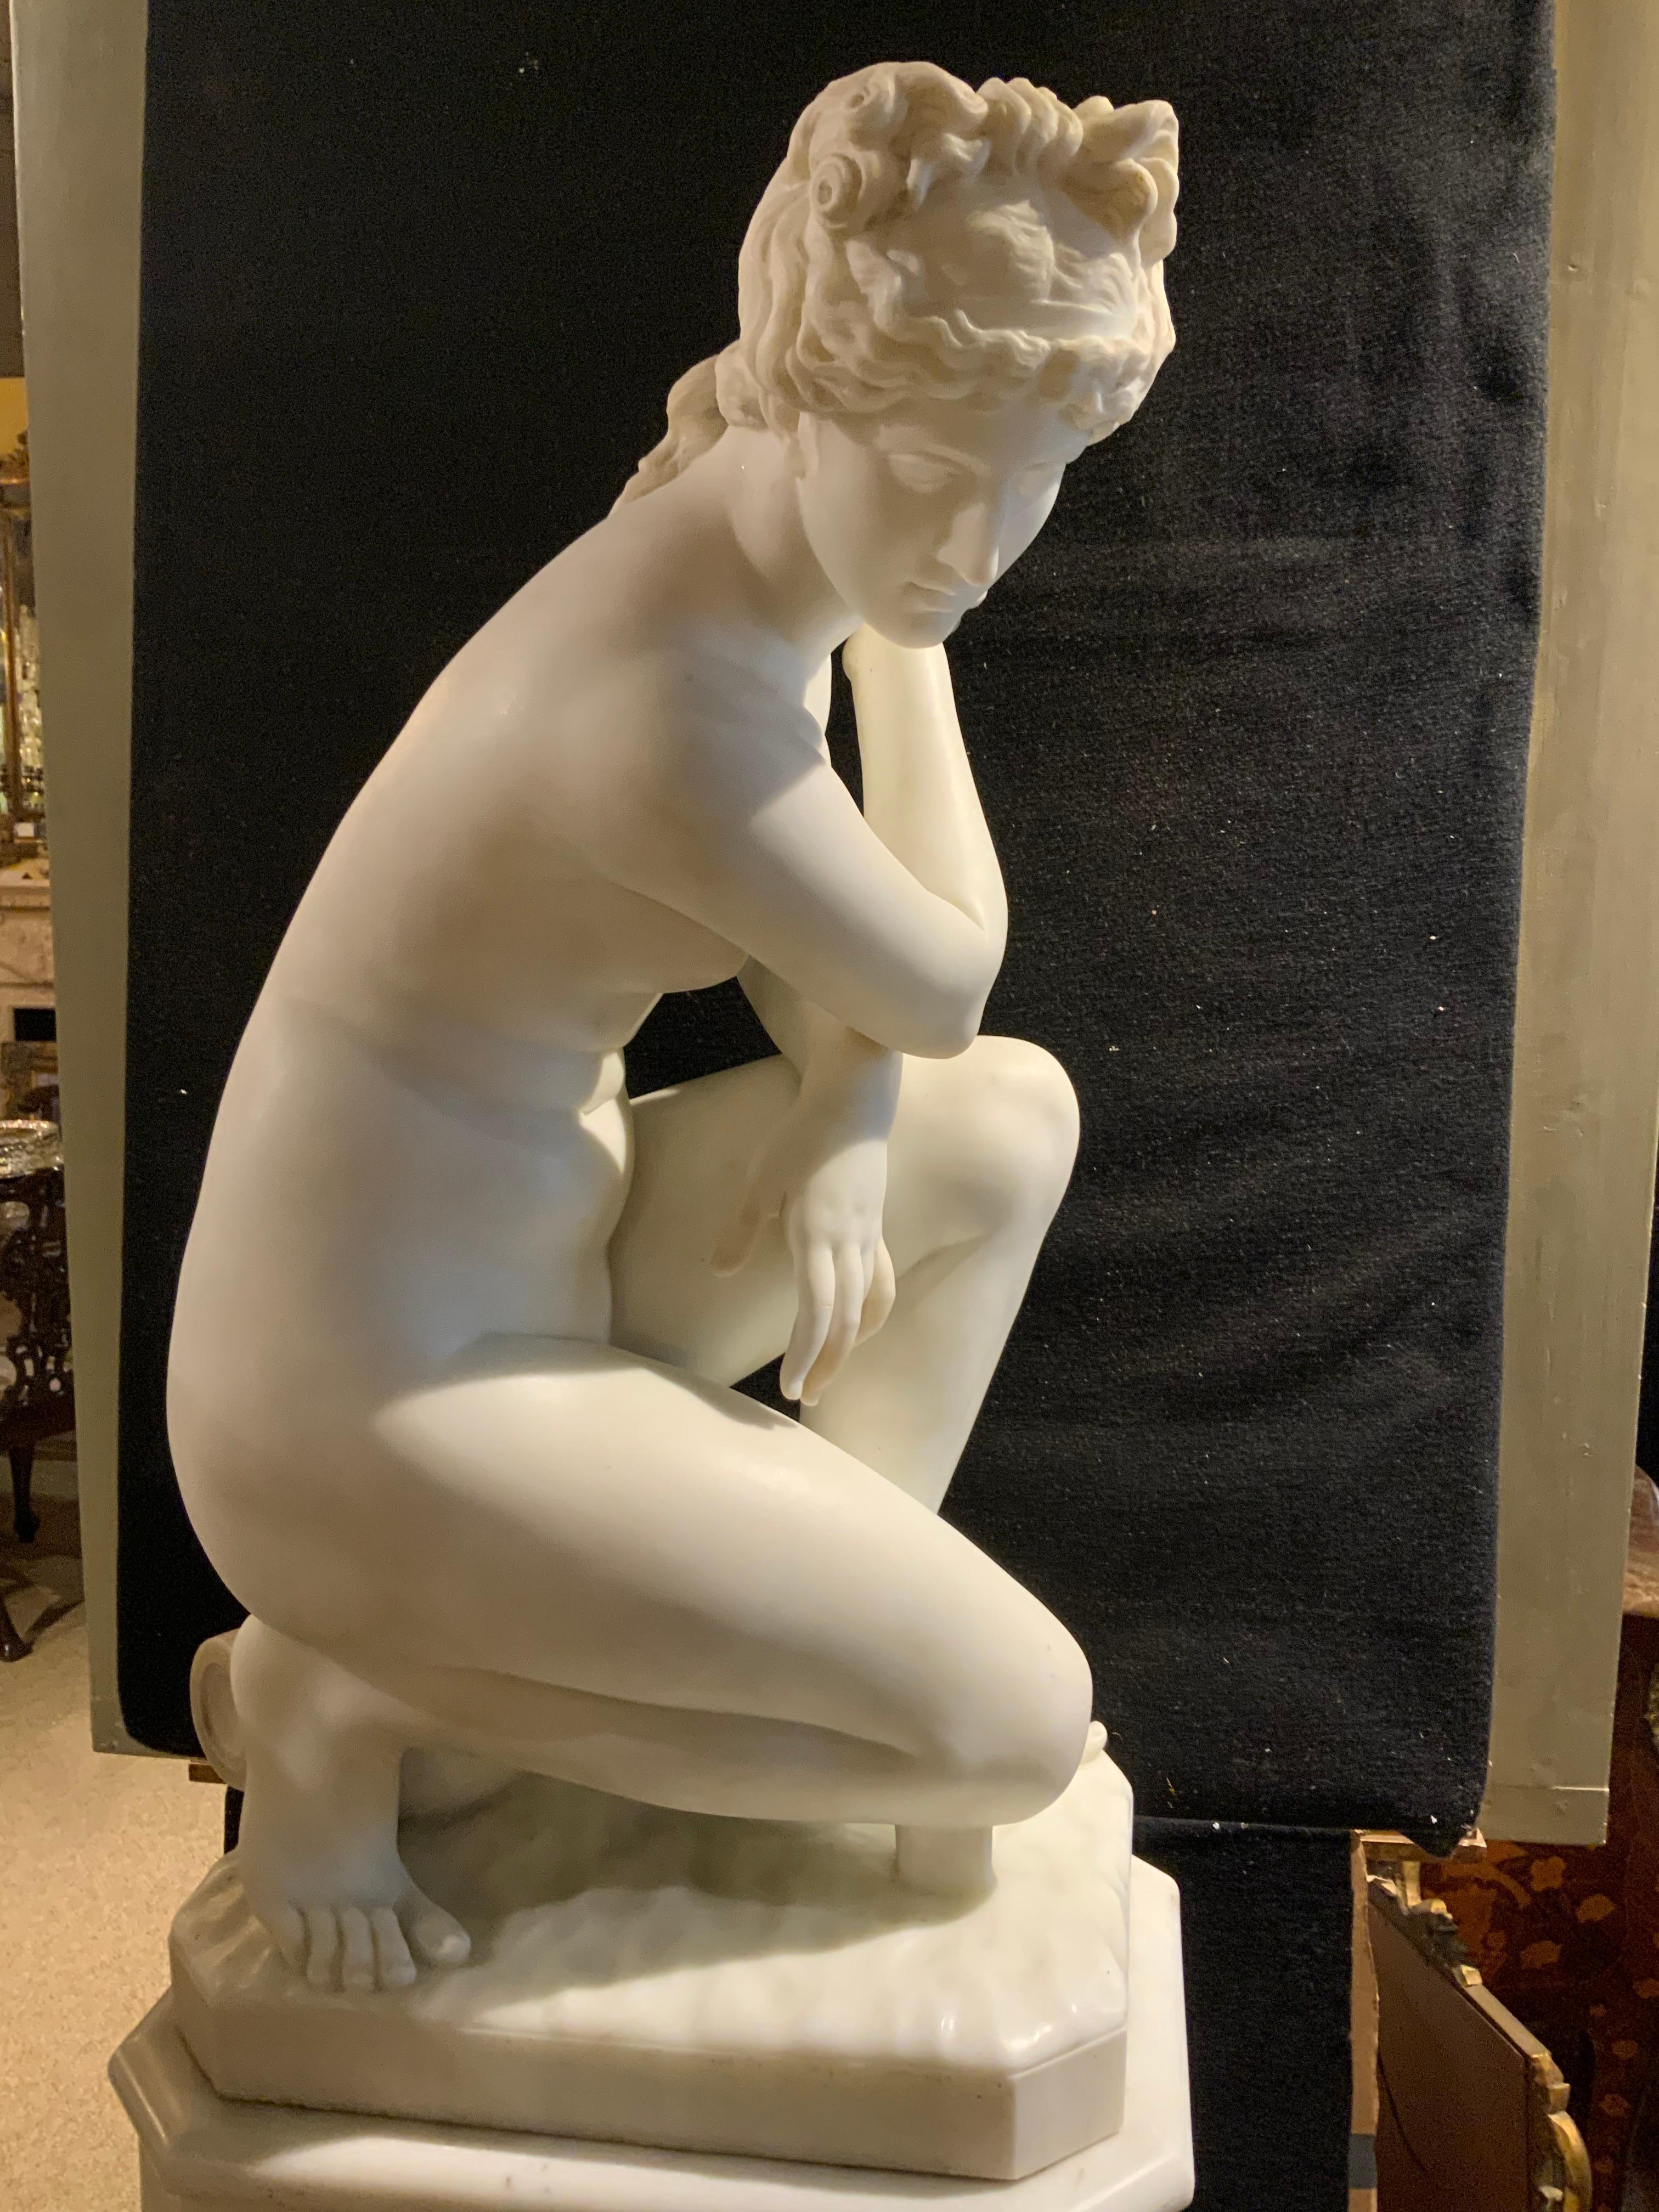 Neoclassical carved white marble sculpture, crouching Venus, signed verso P. Bazzanti
(Pietro Bazzanti, Italian, 1825-1895), Florence, rising on Carrara marble pedestal, custom 
Carved for the piece. Provenance from a prominent Dallas, Texas